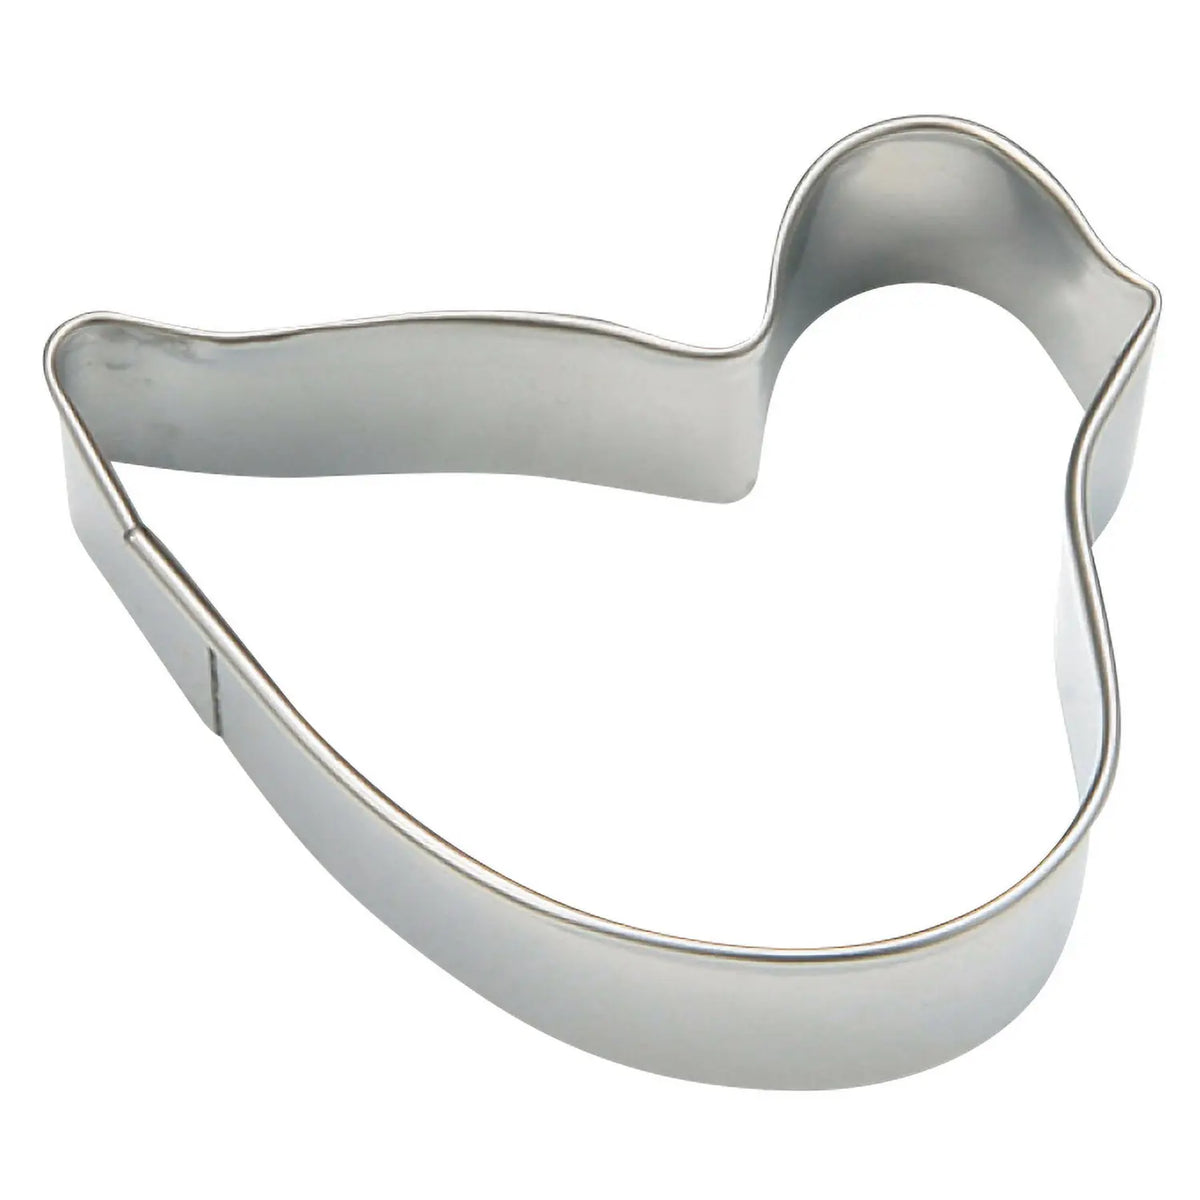 TIGERCROWN Cake Land Stainless Steel Cookie Cutter Duck